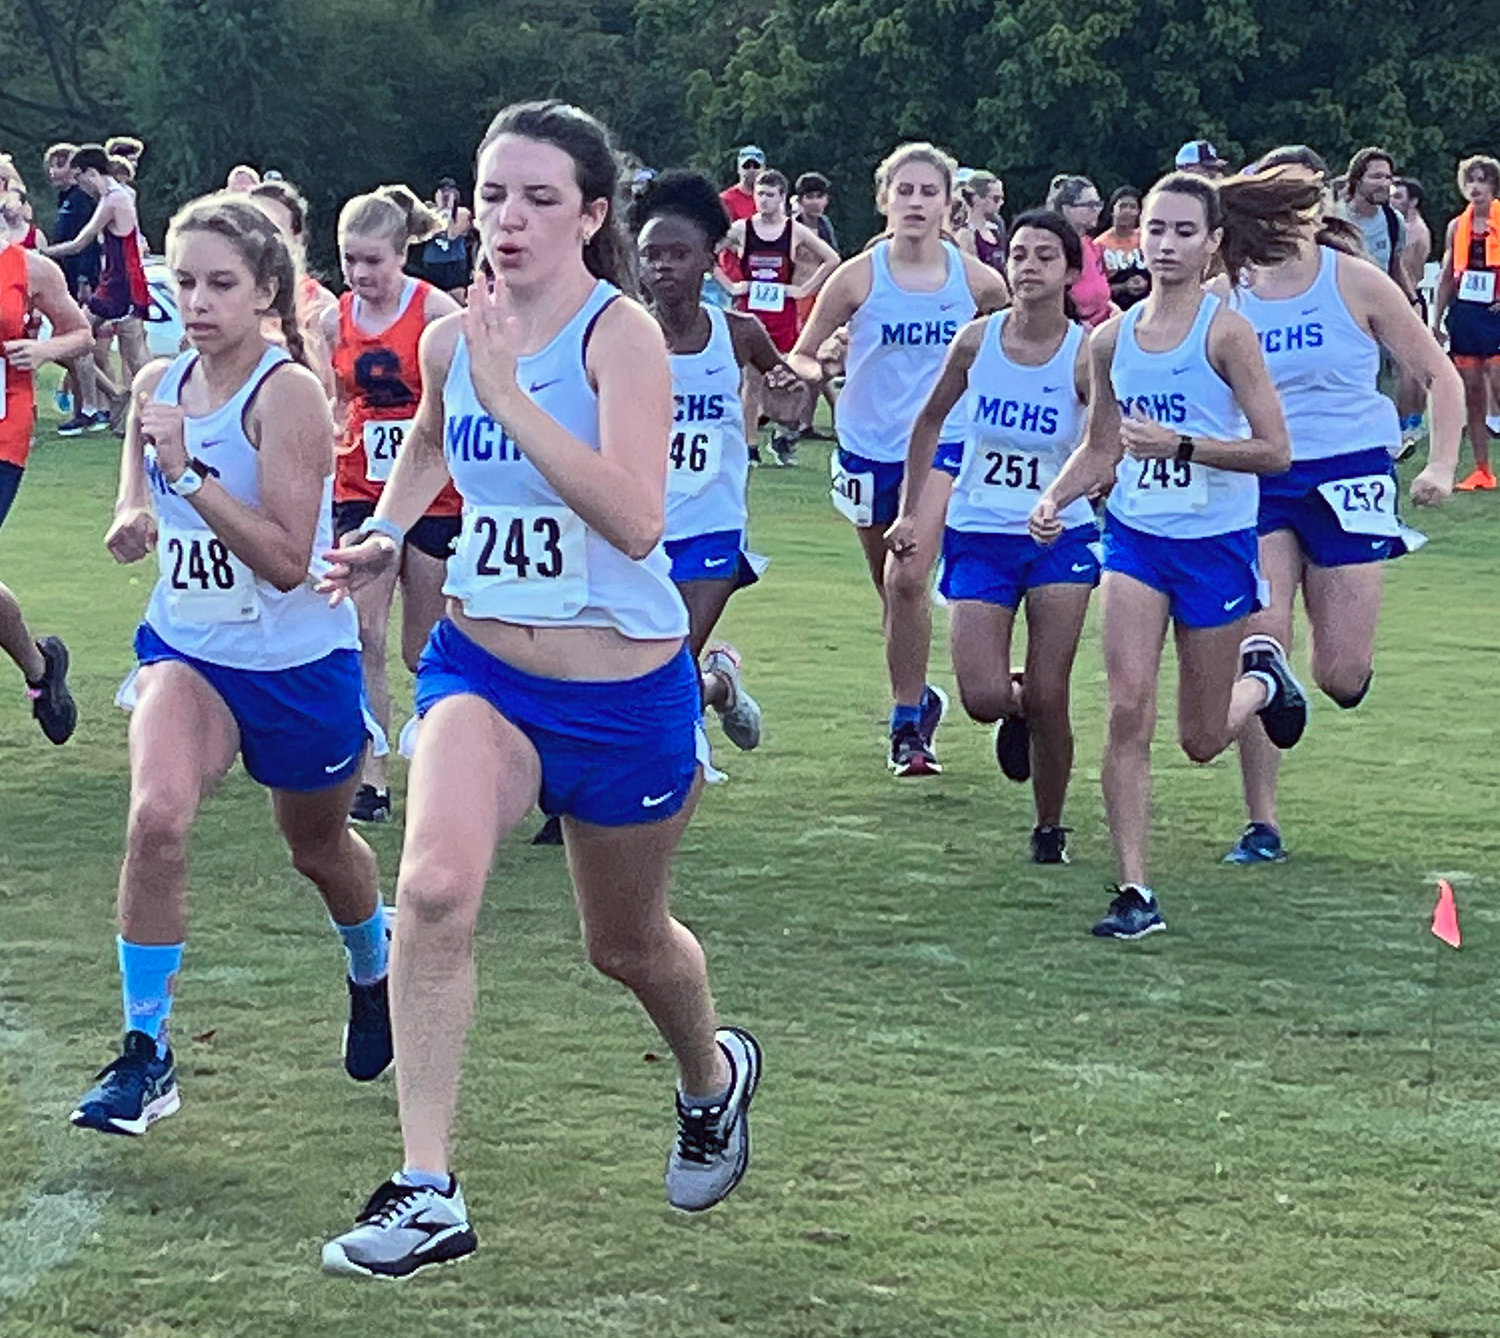 The Tigerettes take off at the start of the Voyles Classic.